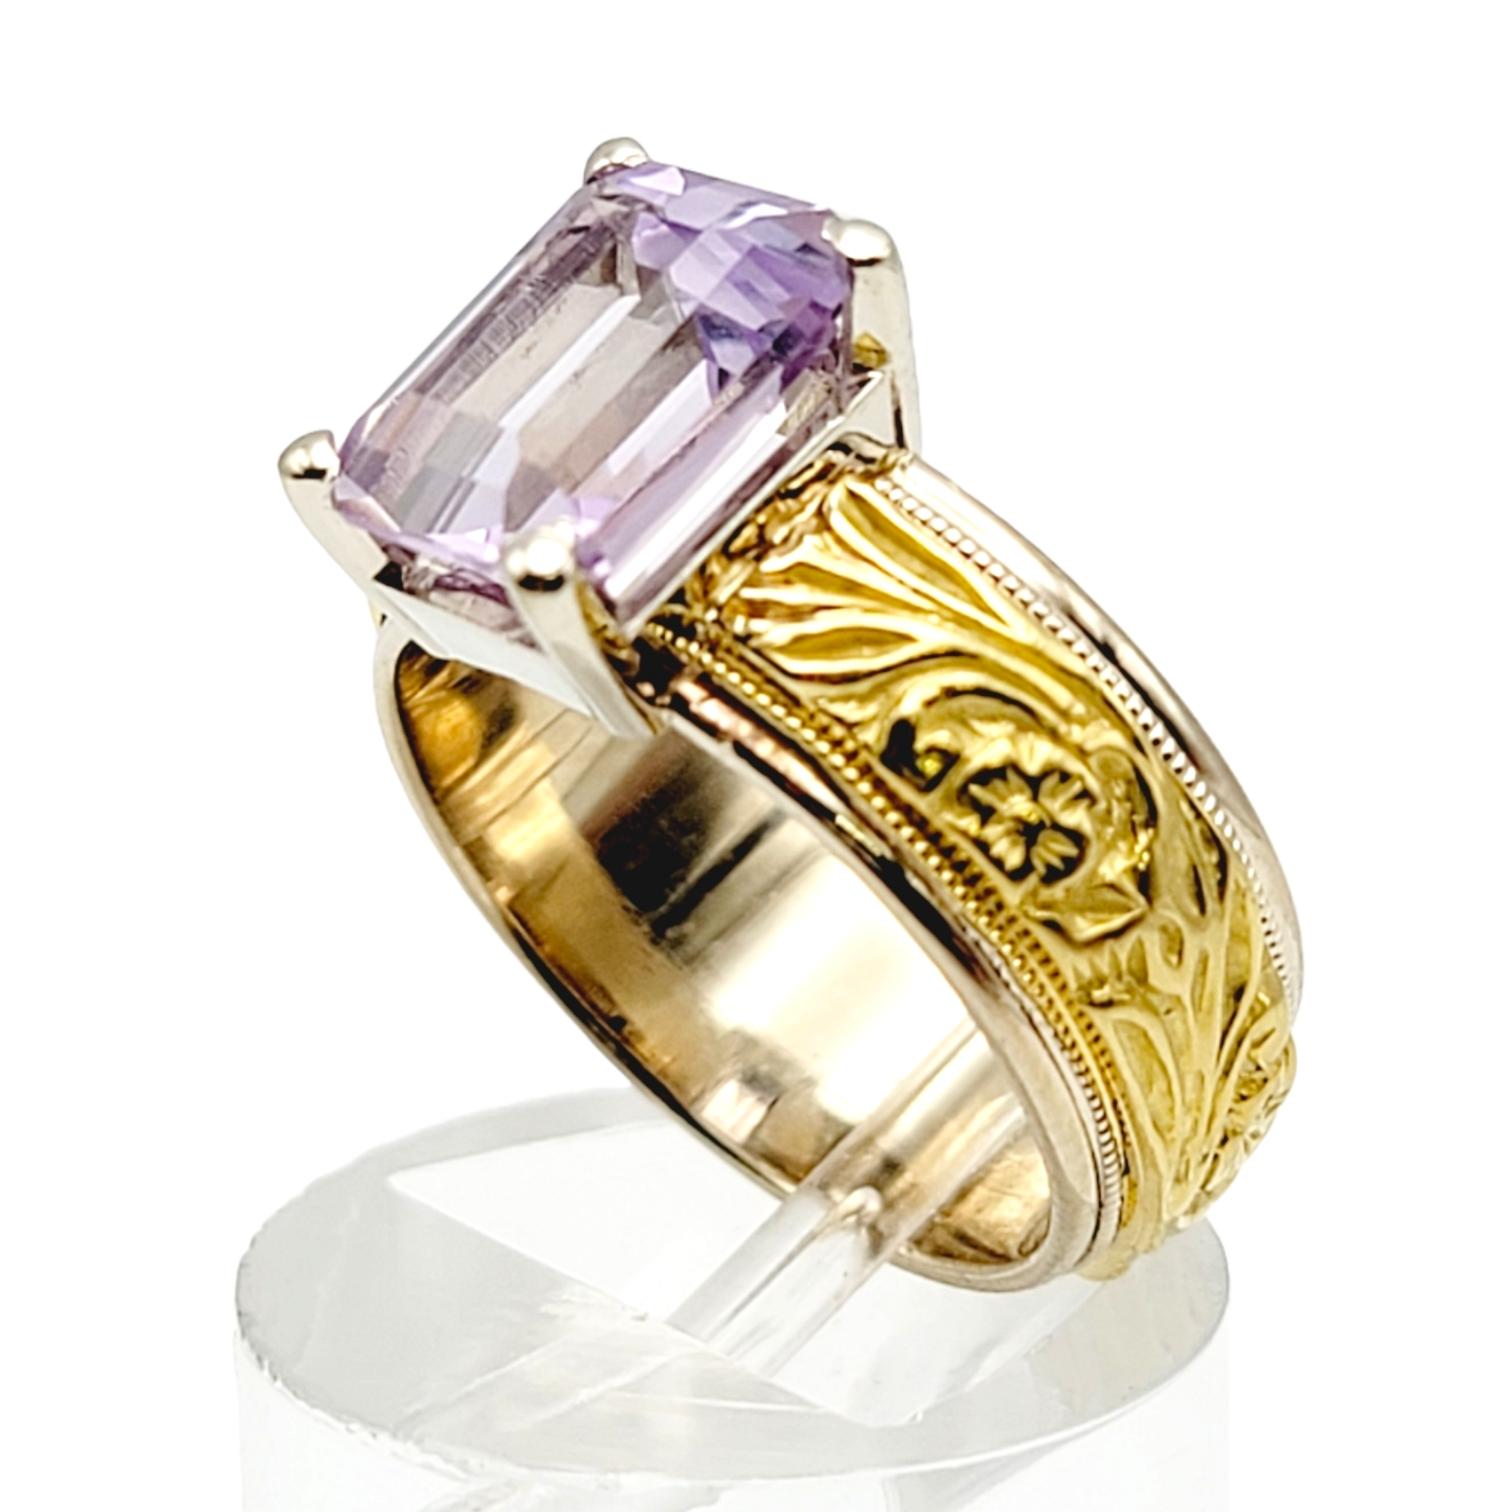 Emerald Cut Amethyst Solitaire Ring with Ornate Engraved Band in 18 Karat Gold For Sale 3